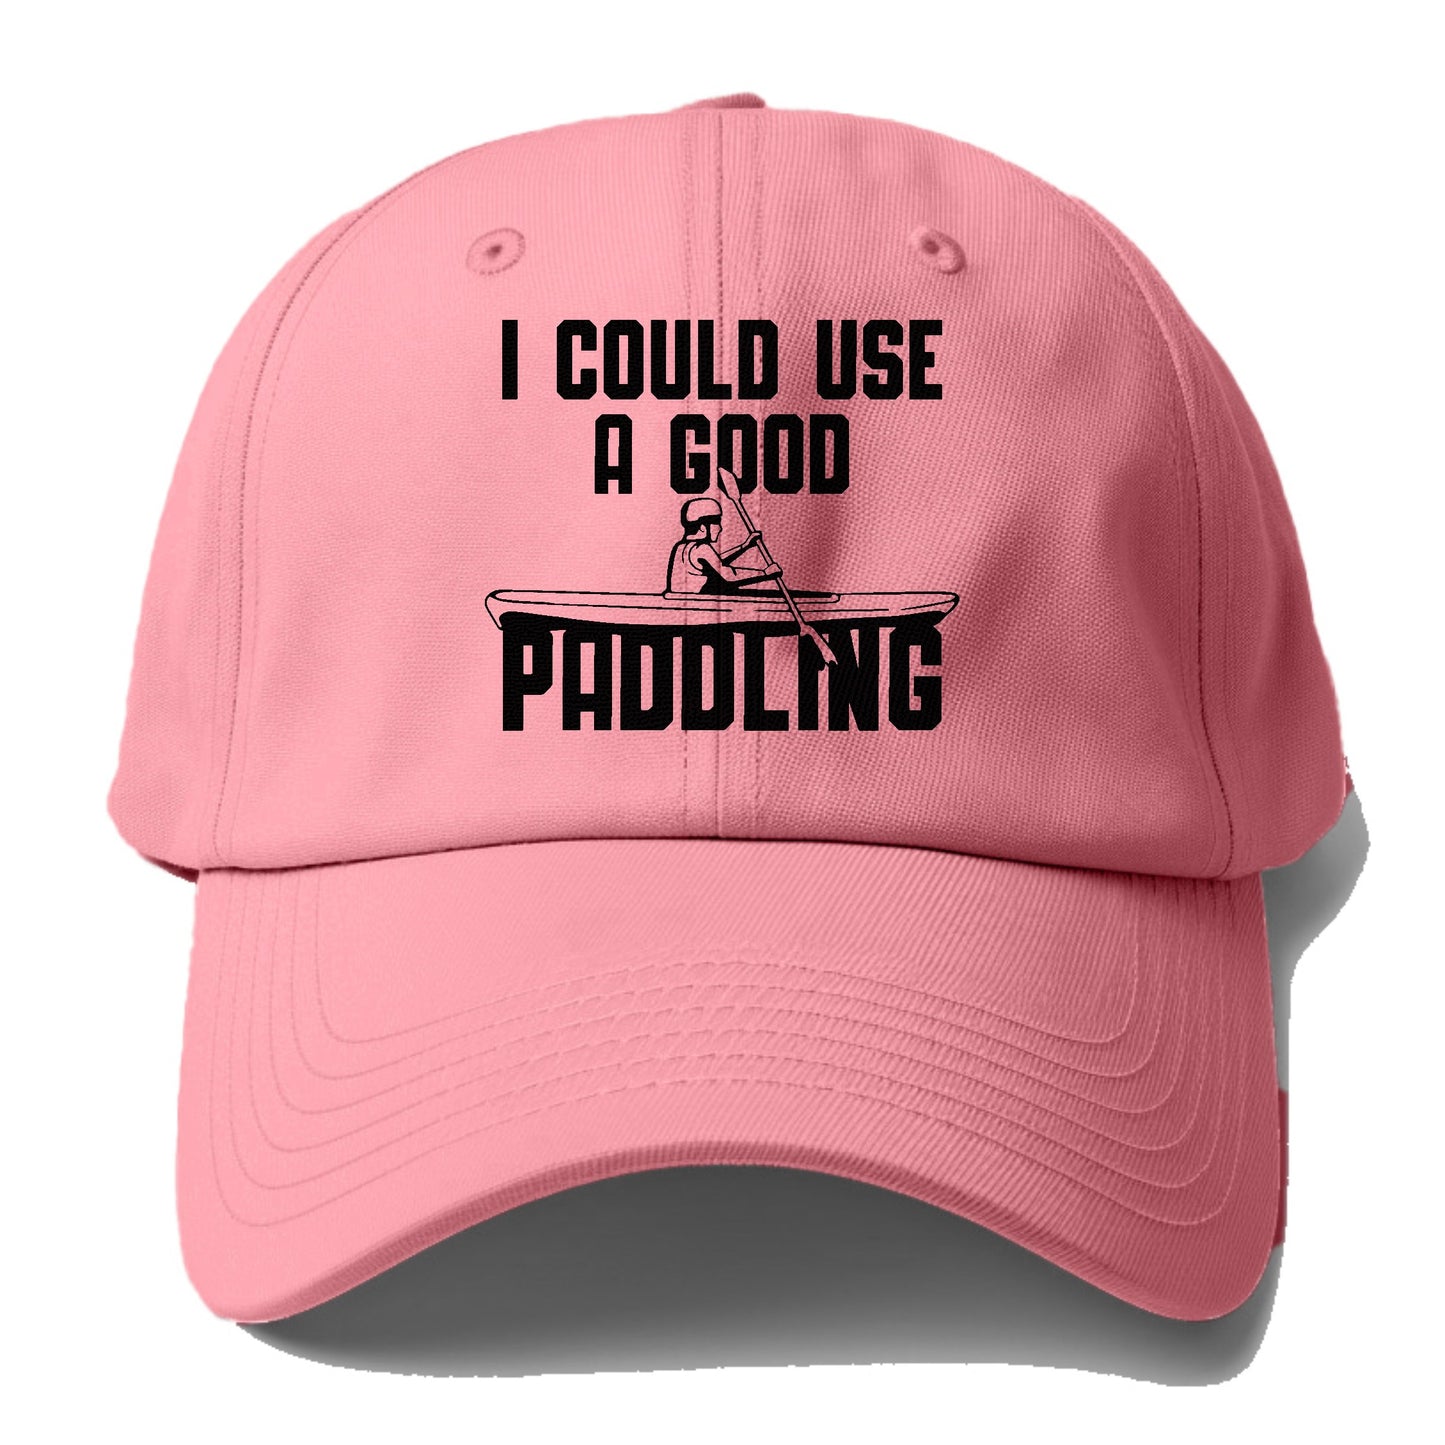 i could use a good paddling! Hat